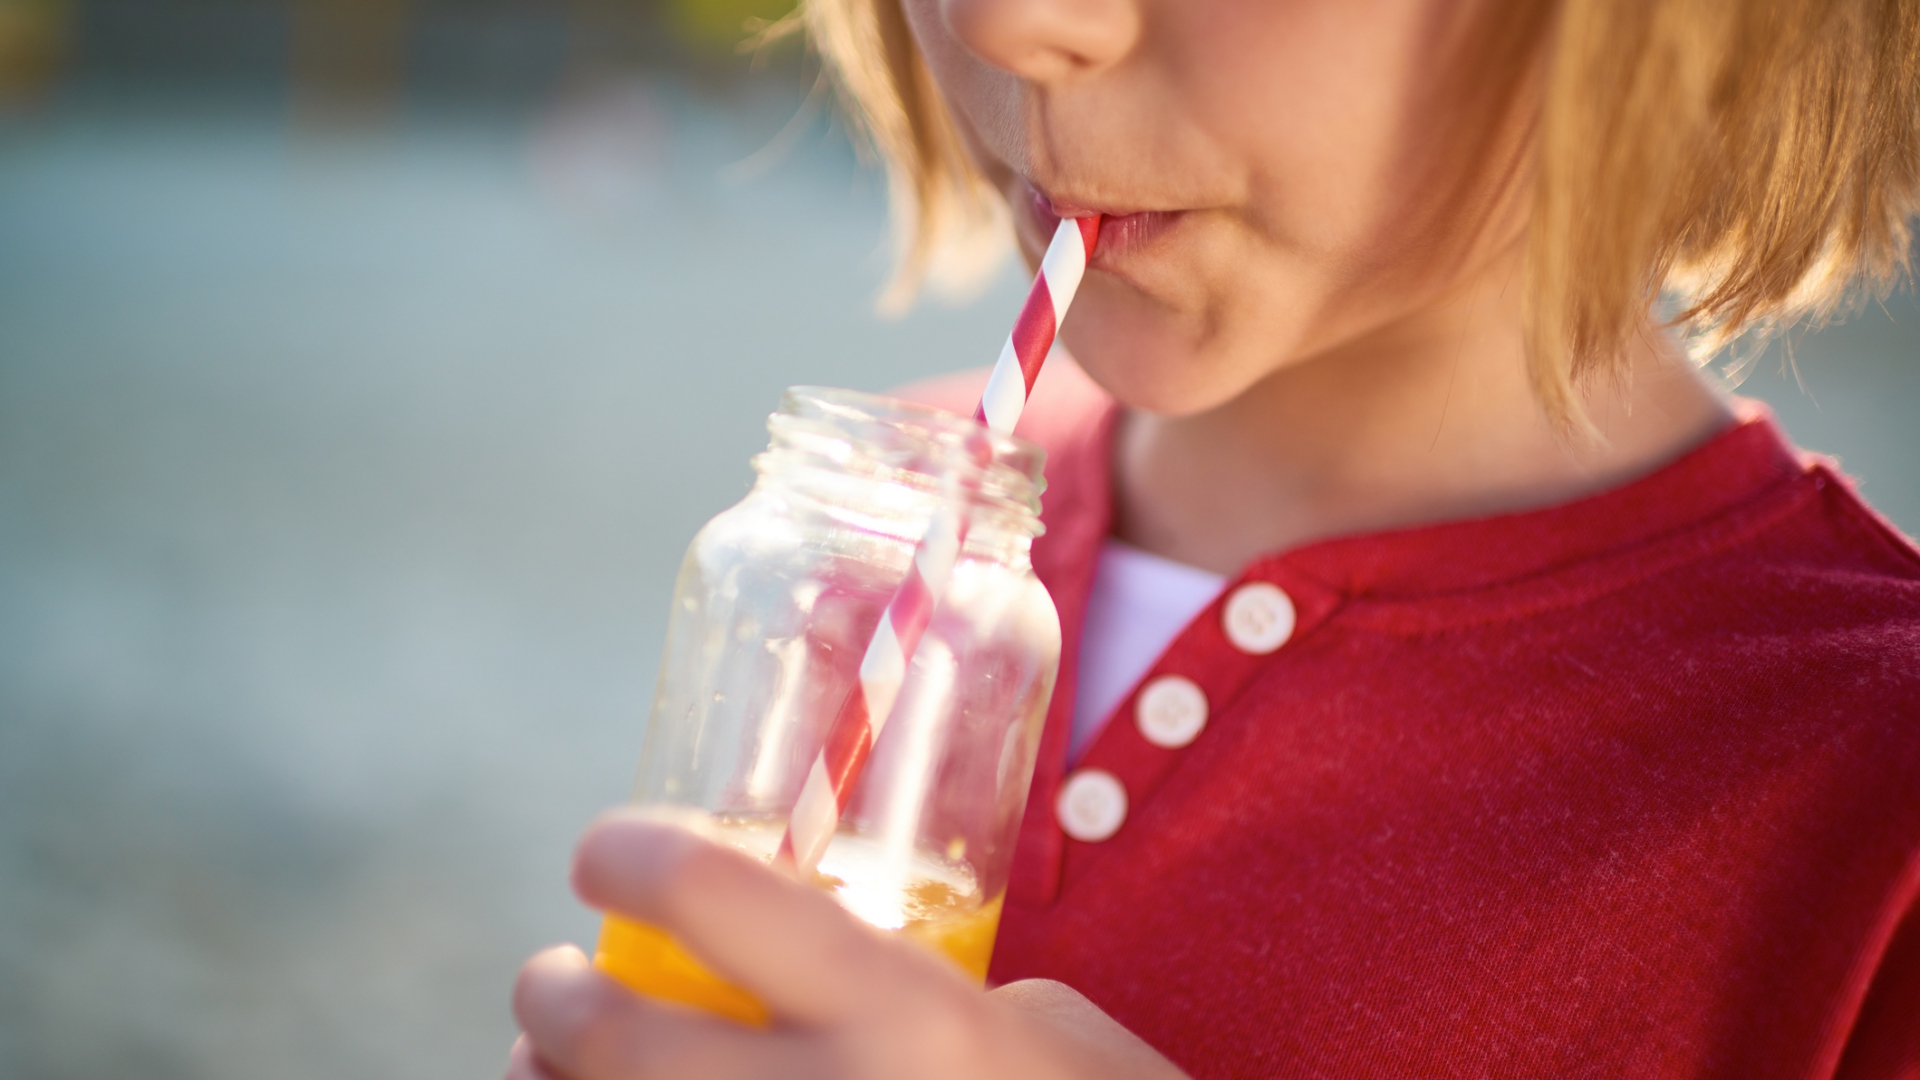 Protect kids from sugary drinks; Stop, rethink and take action now!